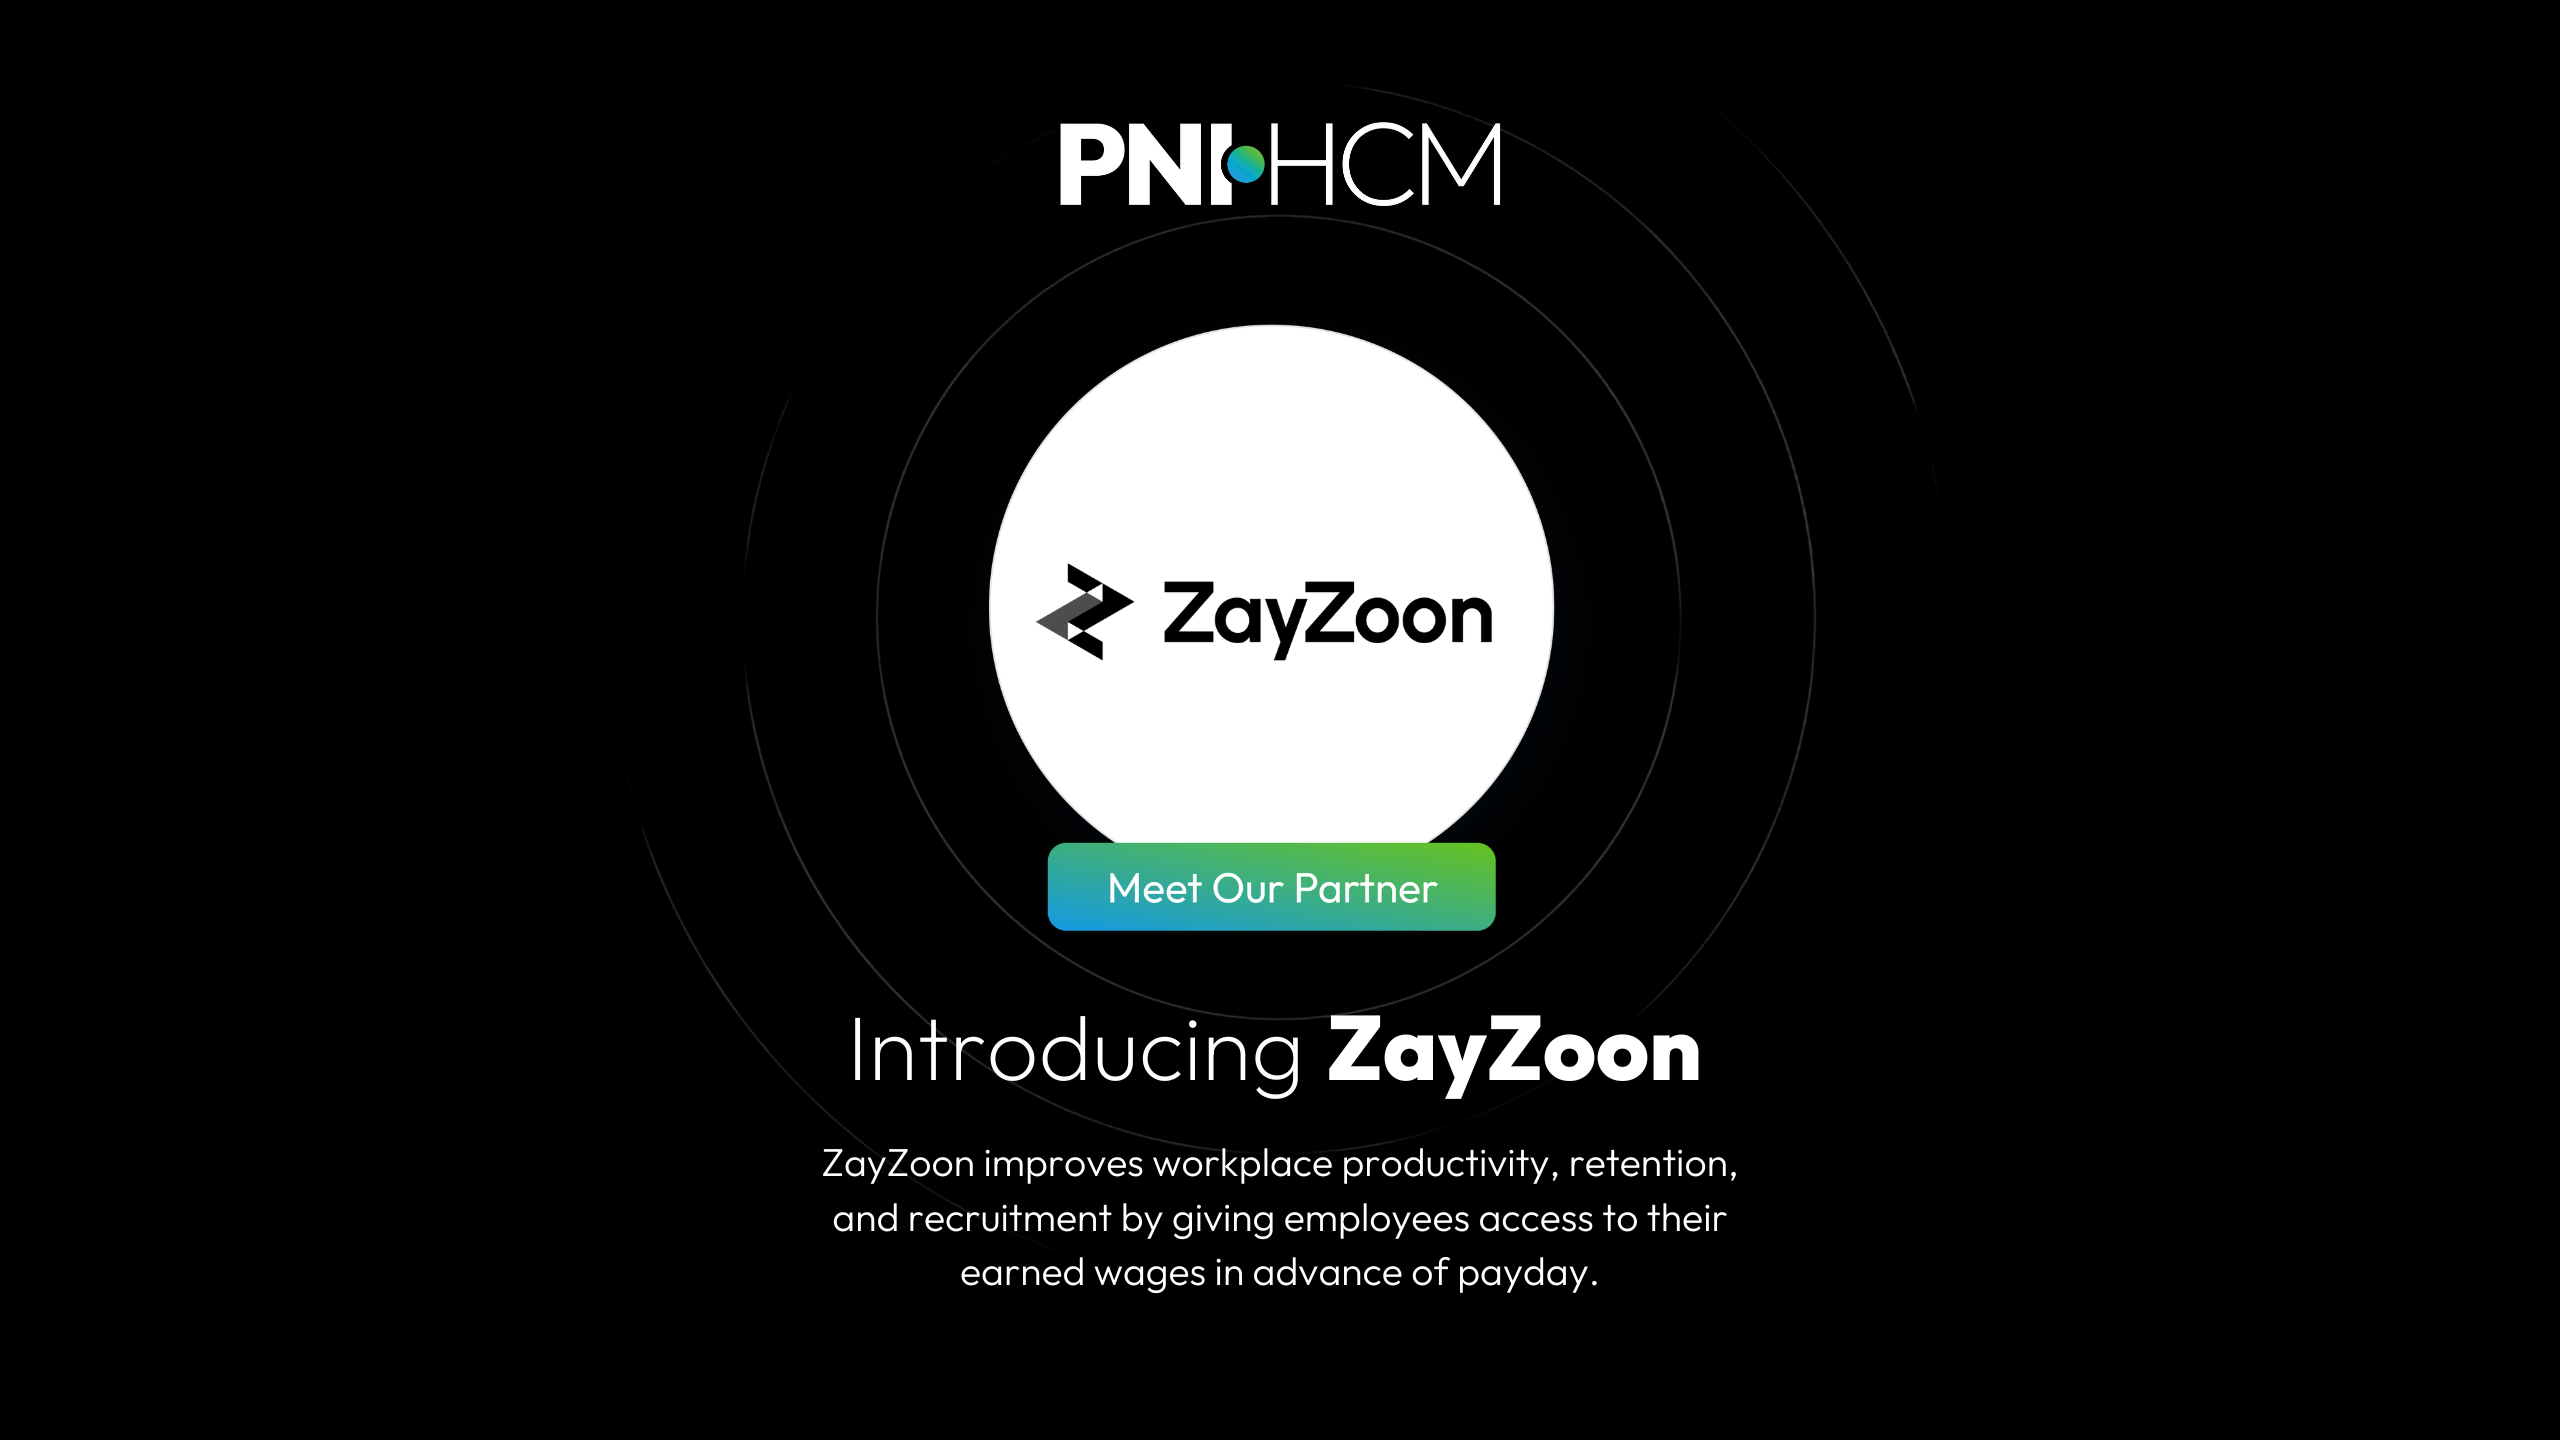 PNI•HCM Partners with ZayZoon